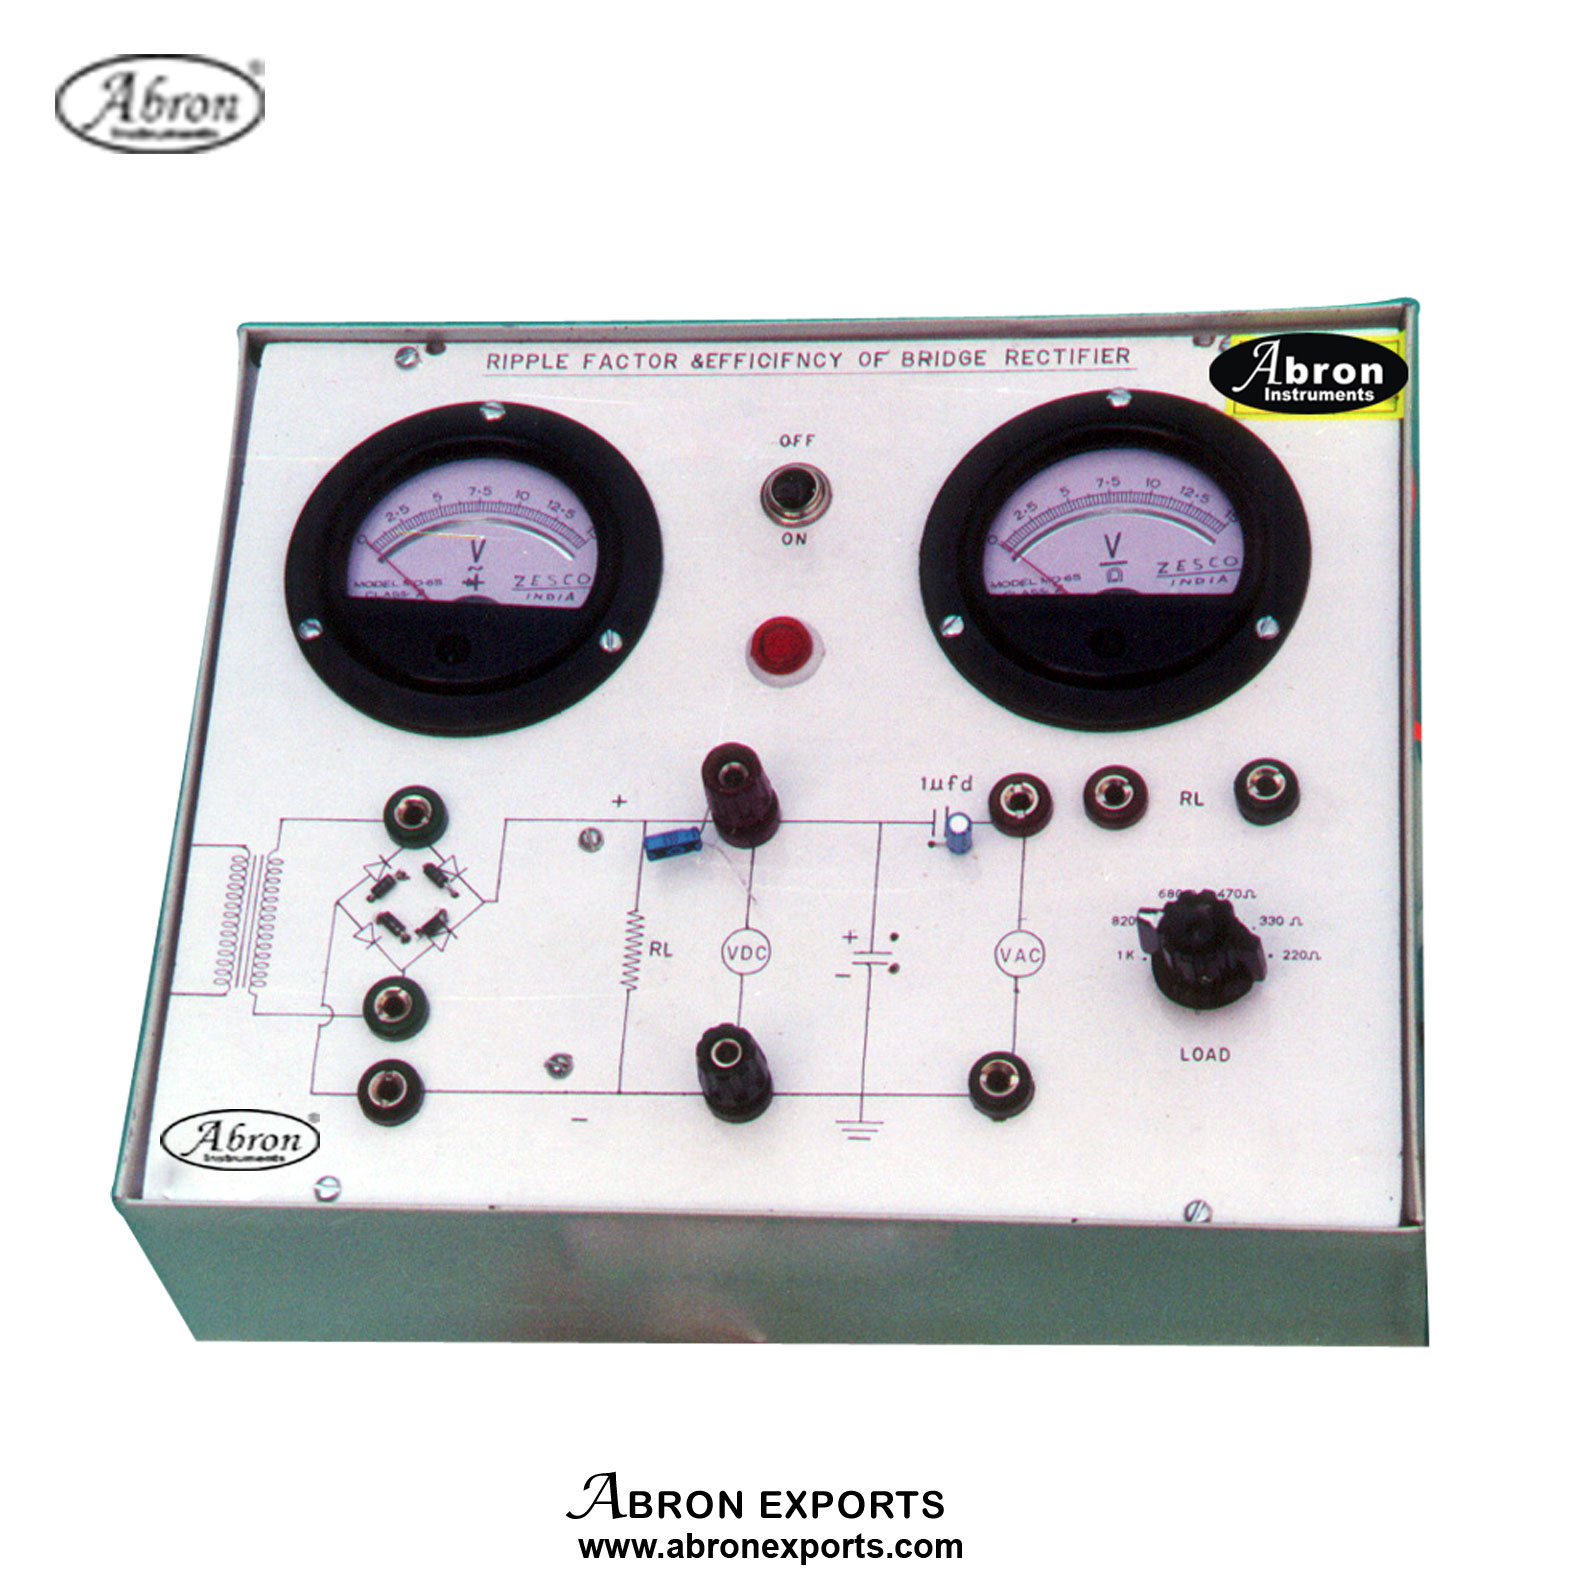 To Study Filter Circuit and Ripple Factor with CRO Digital 7 inch Abron AE-1424G